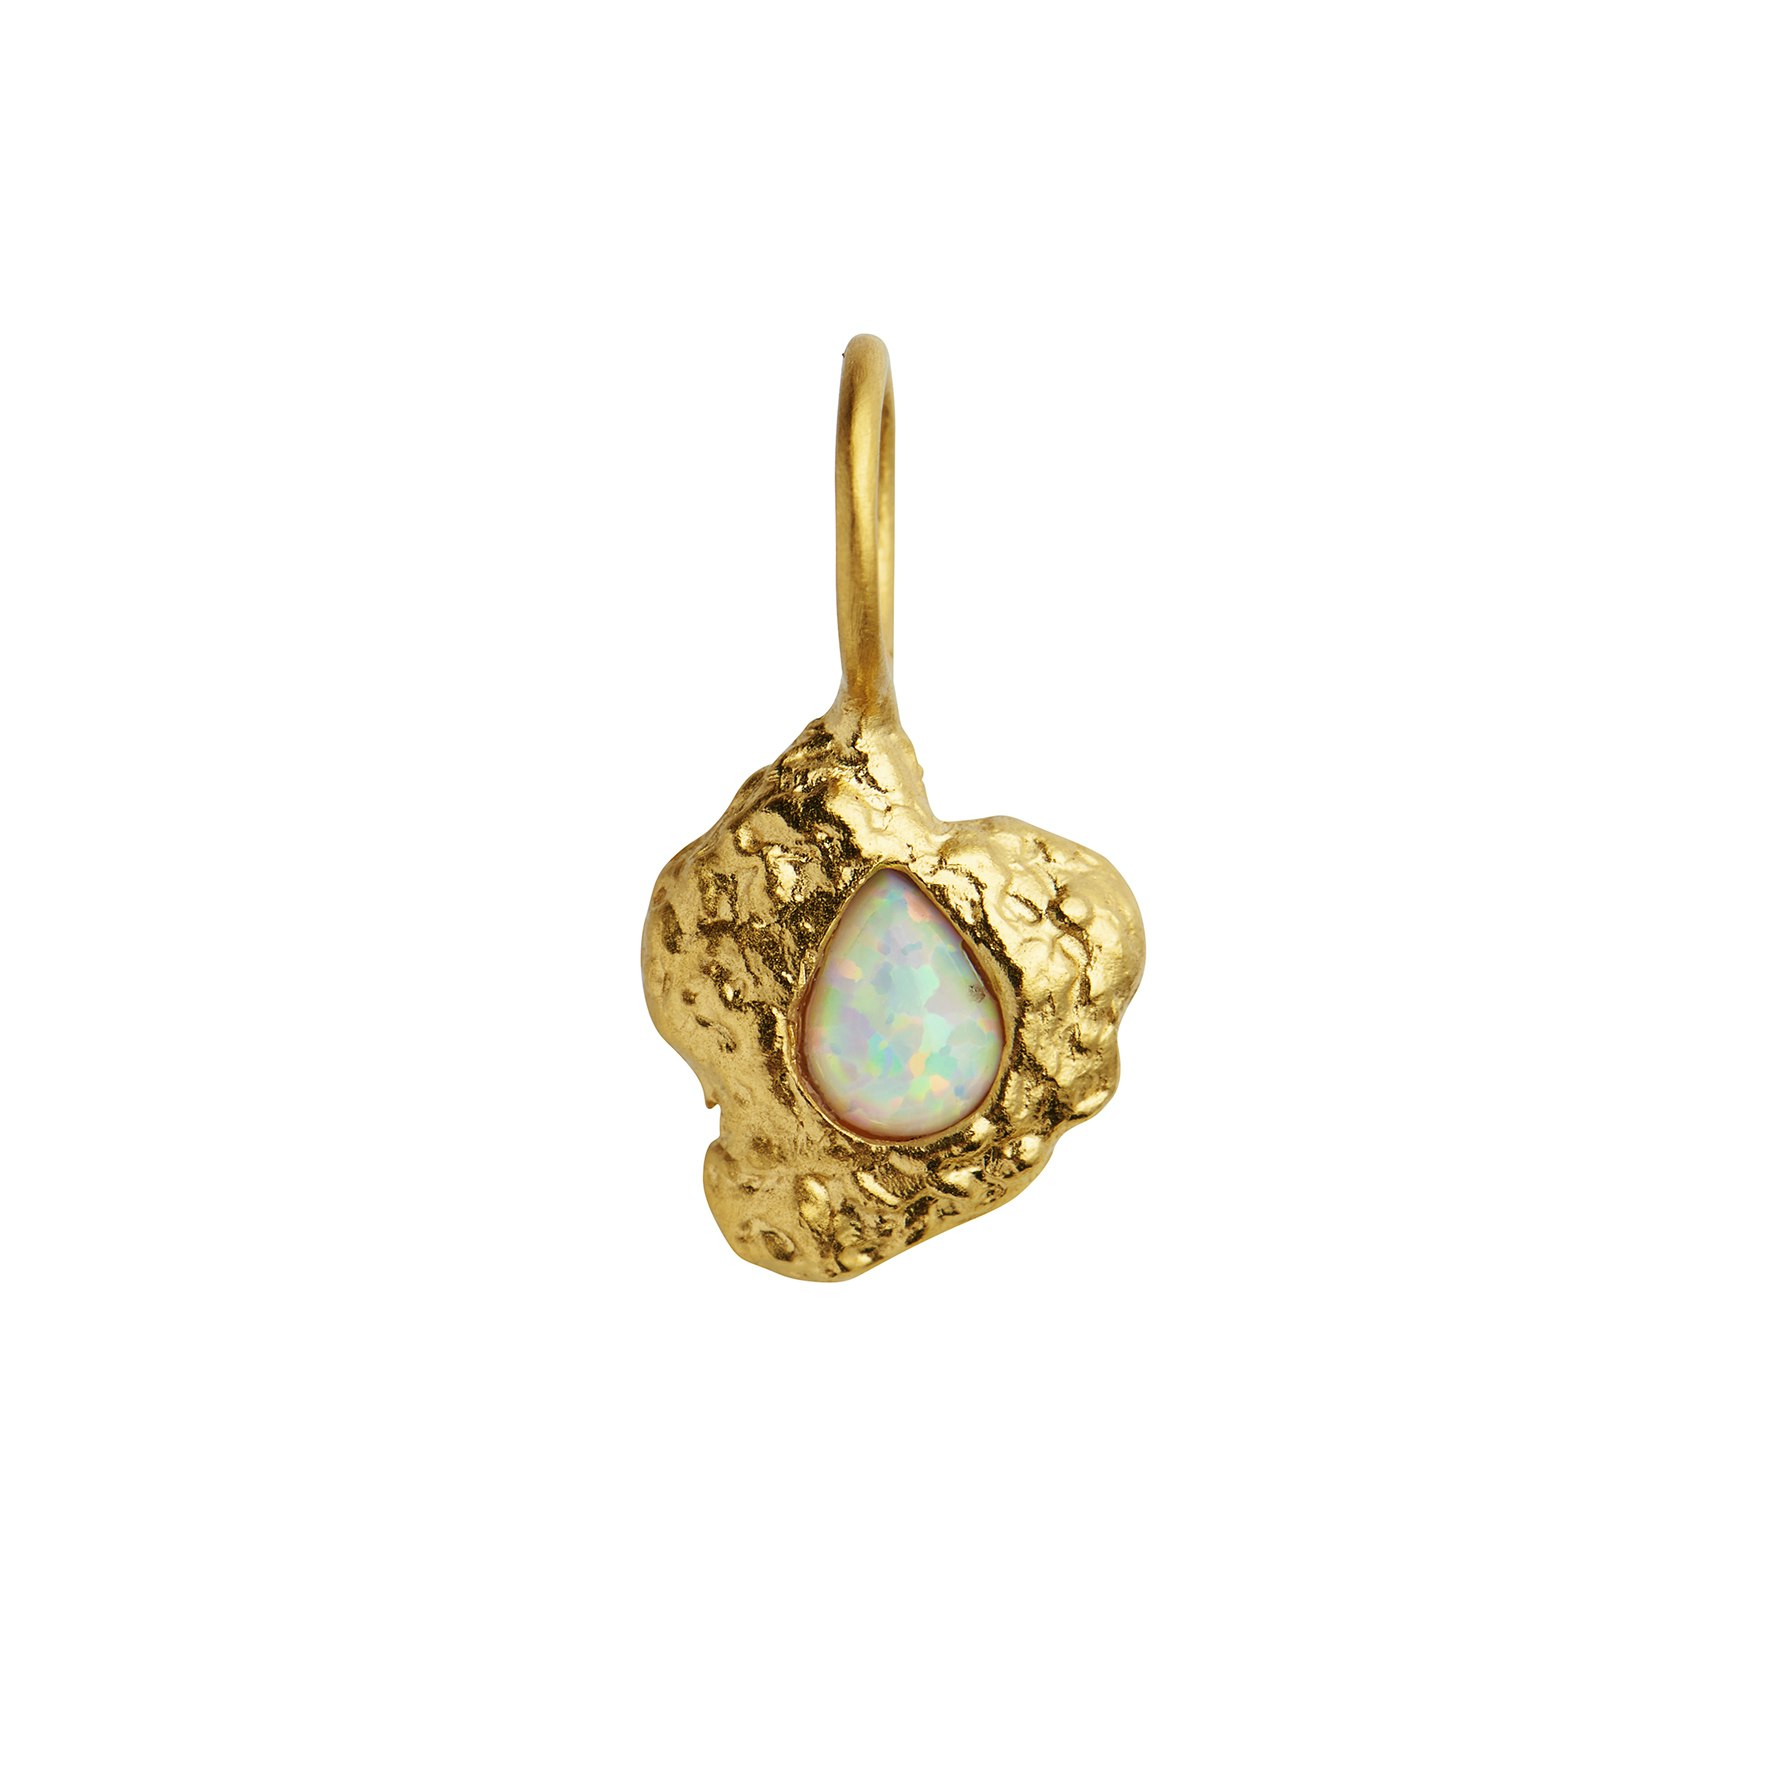 Ocean Glimpse Pendant With Opal from STINE A Jewelry in Goldplated Silver Sterling 925